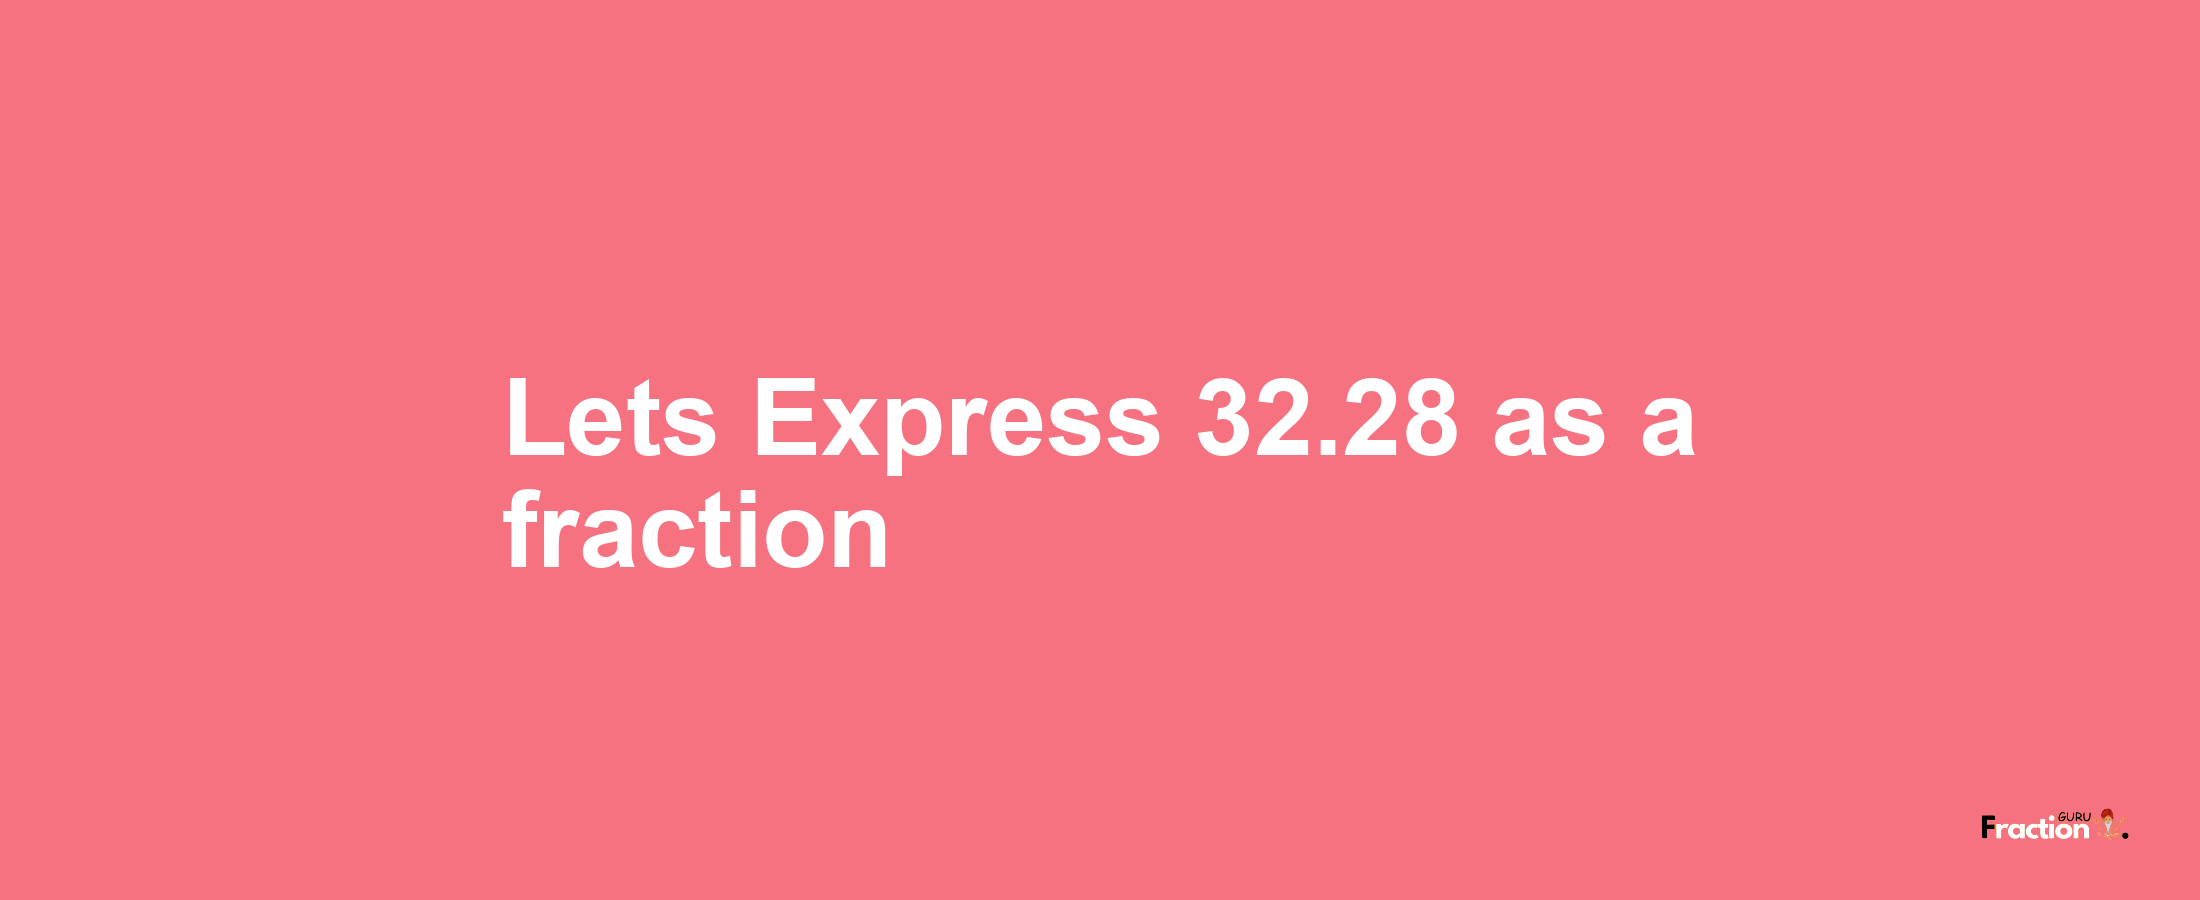 Lets Express 32.28 as afraction